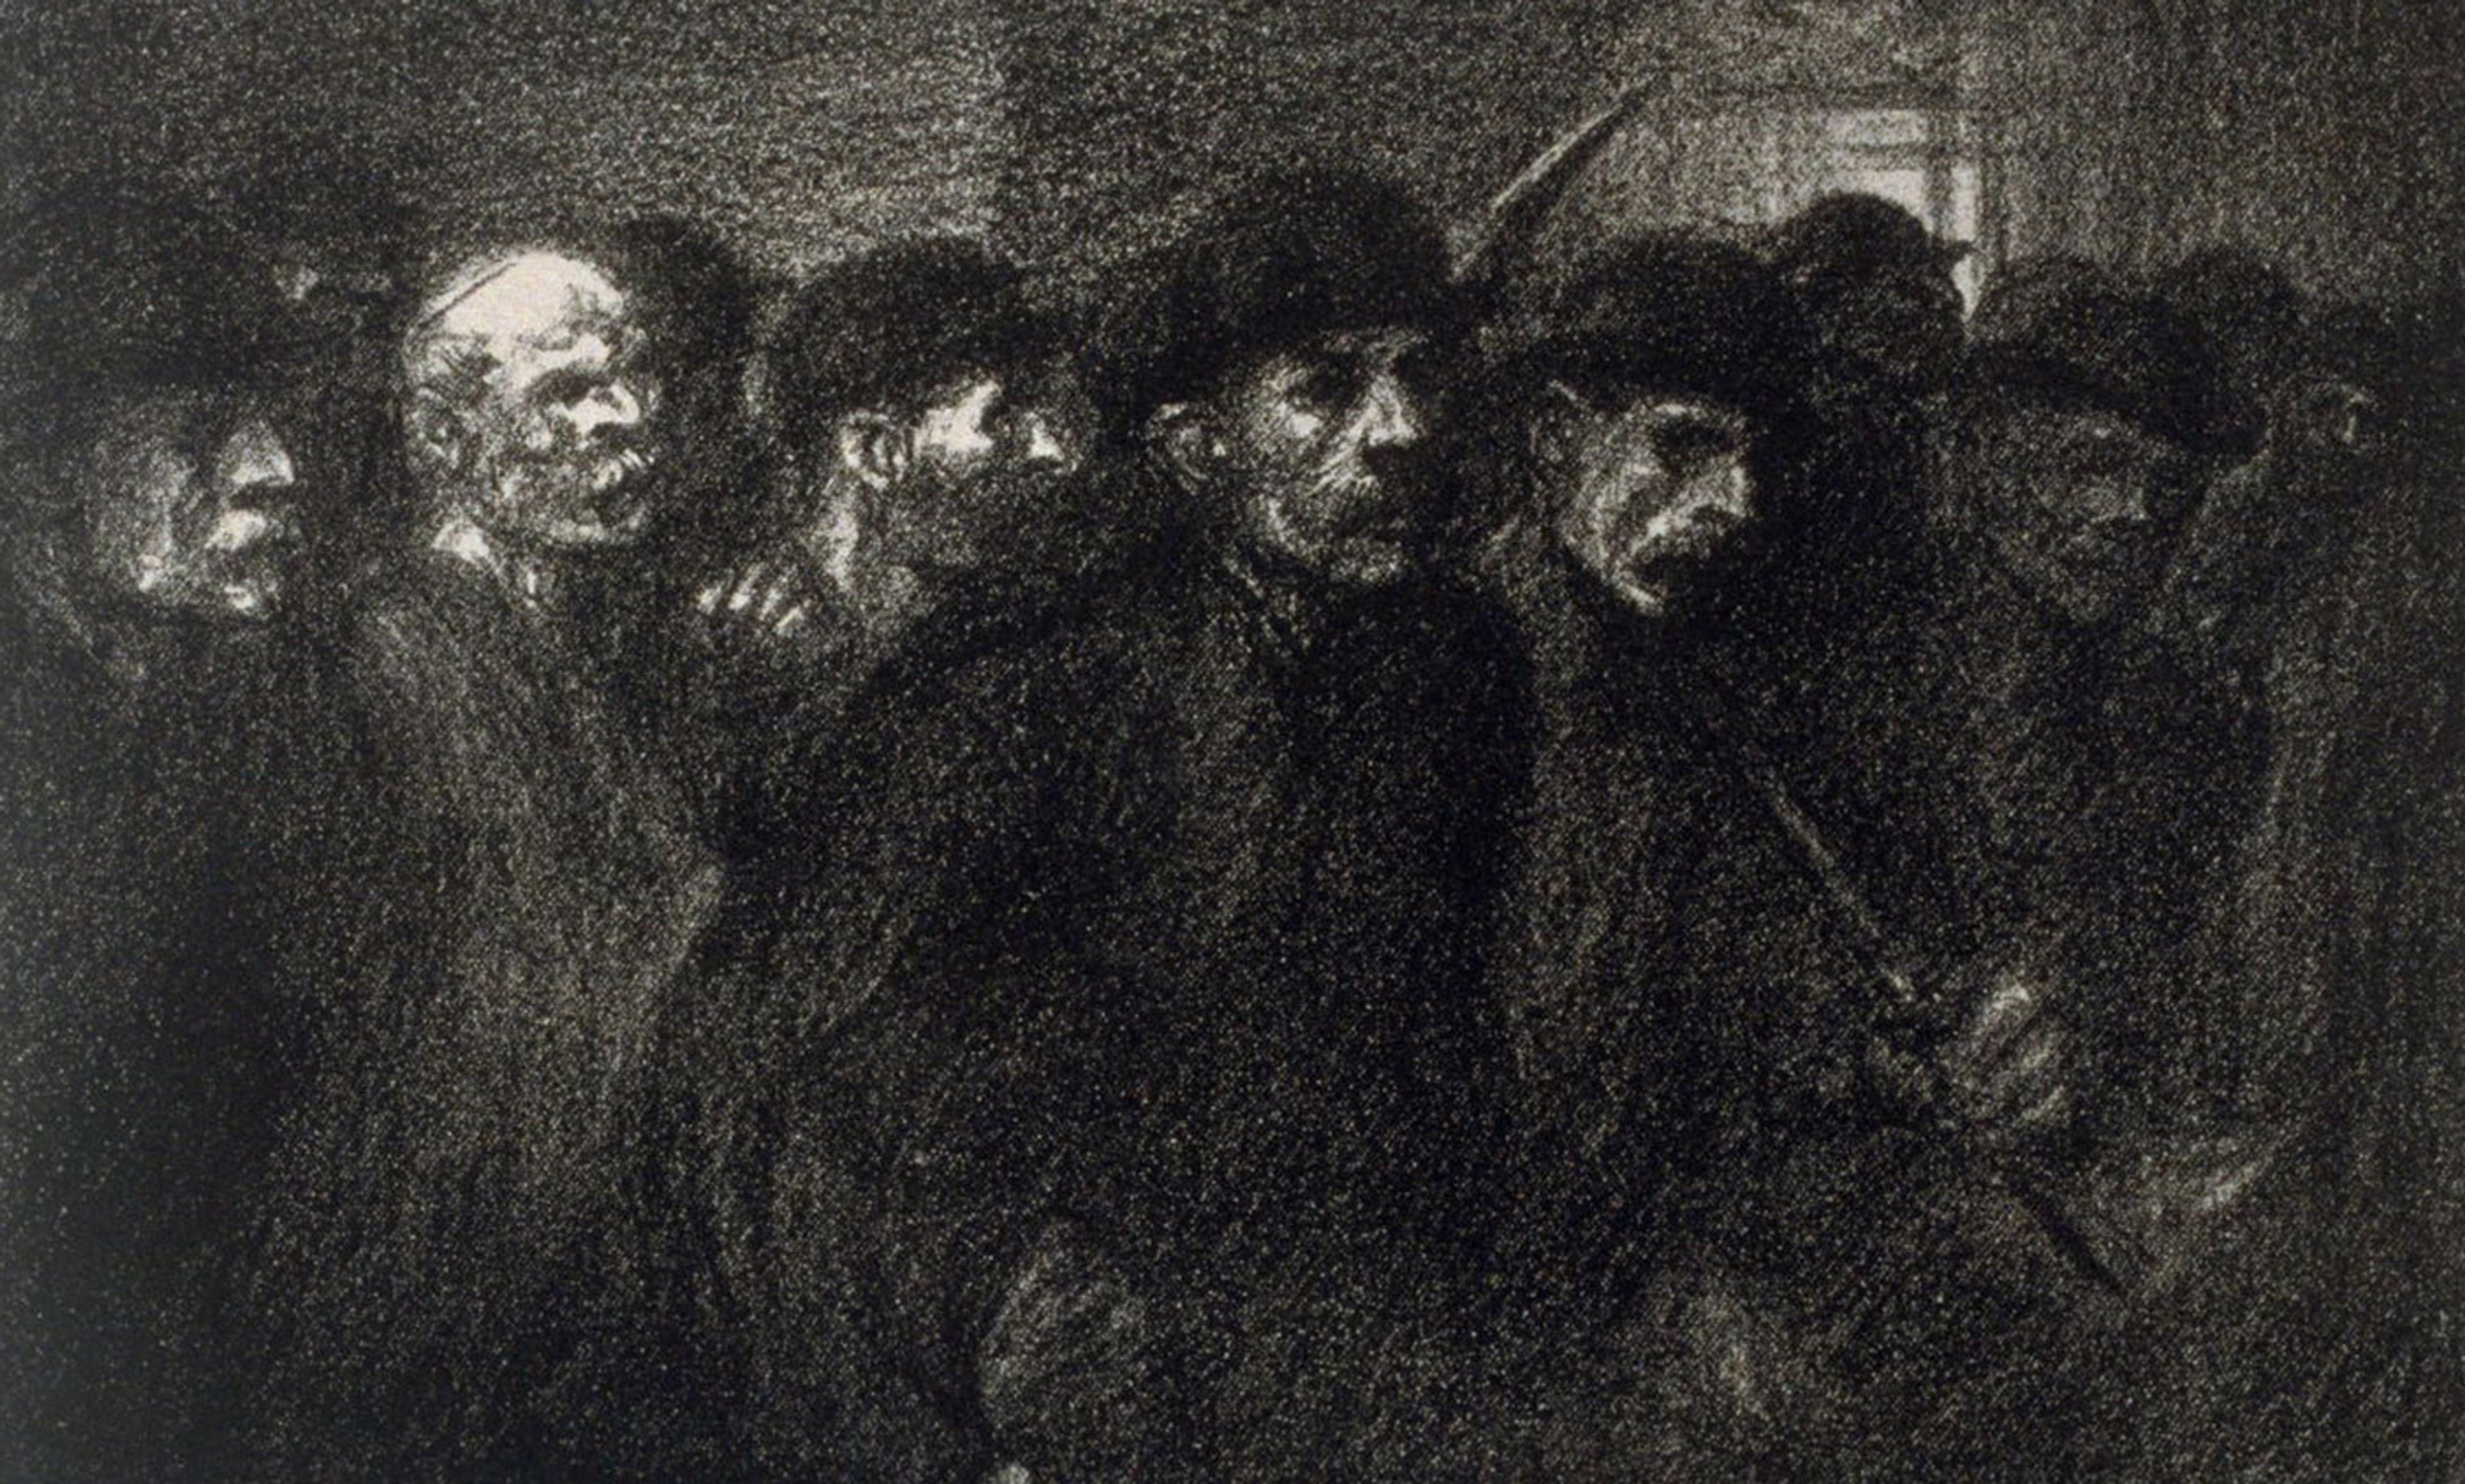 <p><em>Workers Leaving the Factory</em> Lithograph, 1903 by Théophile Alexandre Steinlen. <em>Image courtesy <a target="_blank" rel="noreferrer noopener" href="http://www.famsf.org">www.famsf.org</a> </em></p>